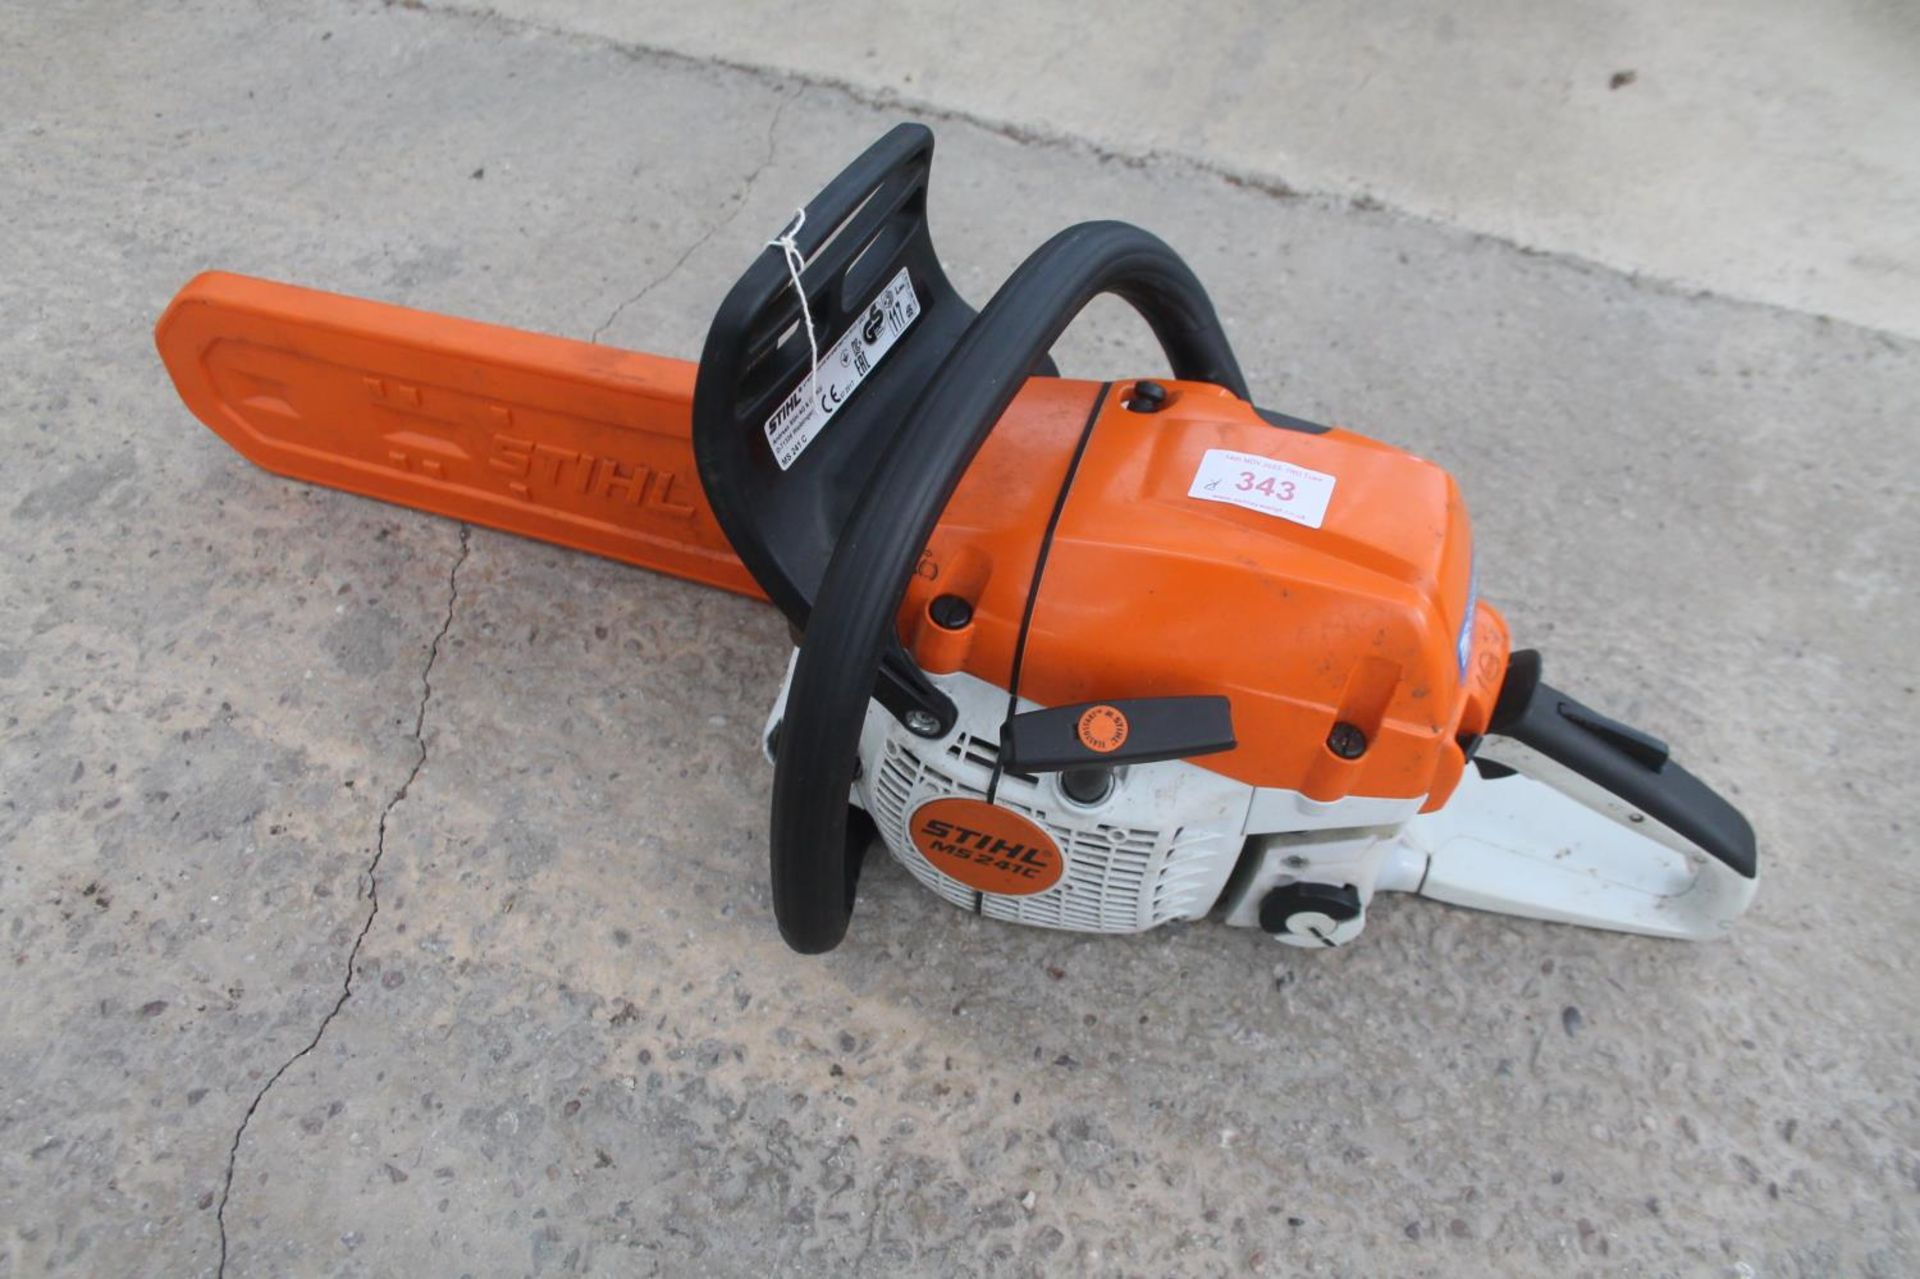 STHIL MS241C CHAINSAW NO VAT LOTS 343-350 ARE FROM A RETIREMENT DISPERSAL THE OTHER EQUIPMENT HAS